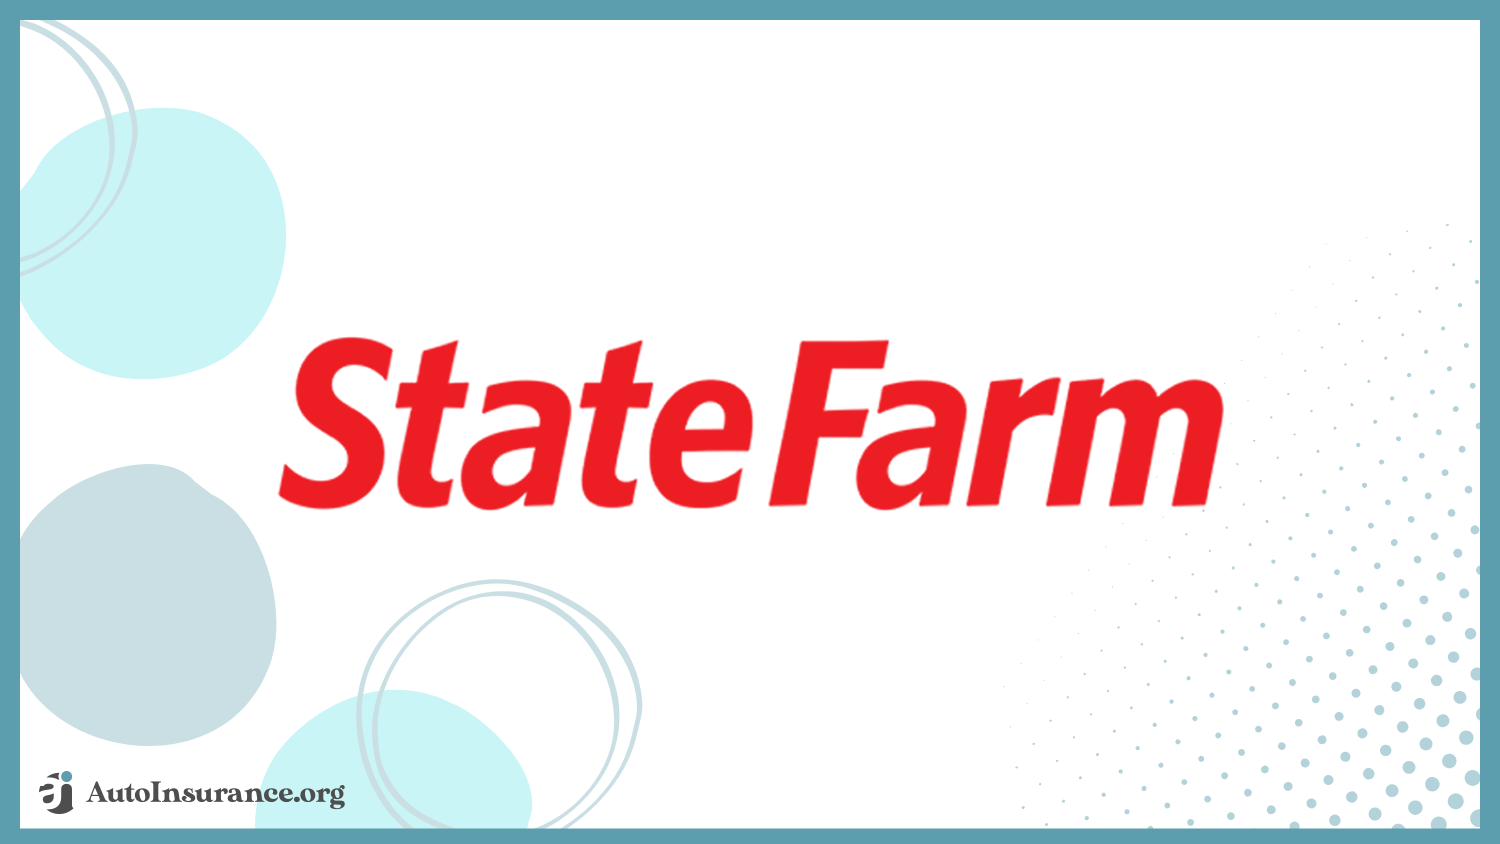 State Farm: Best Auto Insurance Companies That Don't Penalize for Speeding Tickets 